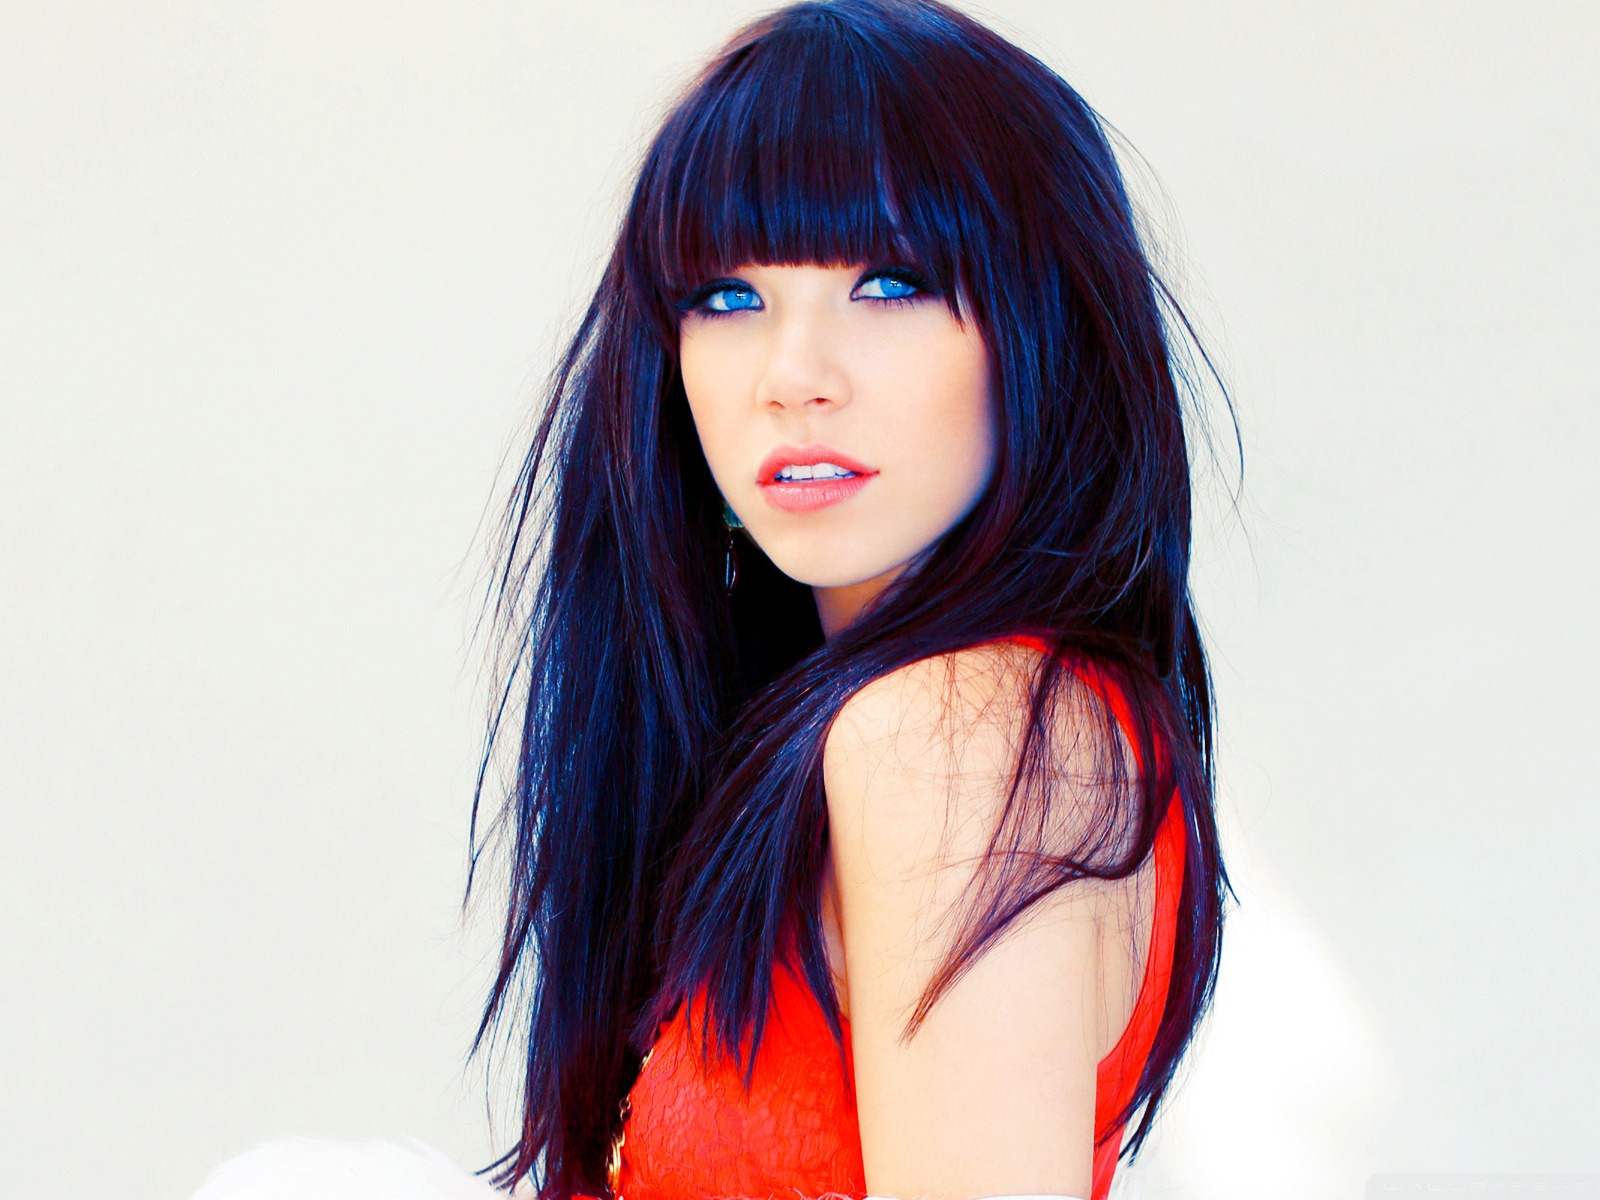 Carly Rae Jepsen Superb for 1600 x 1200 resolution